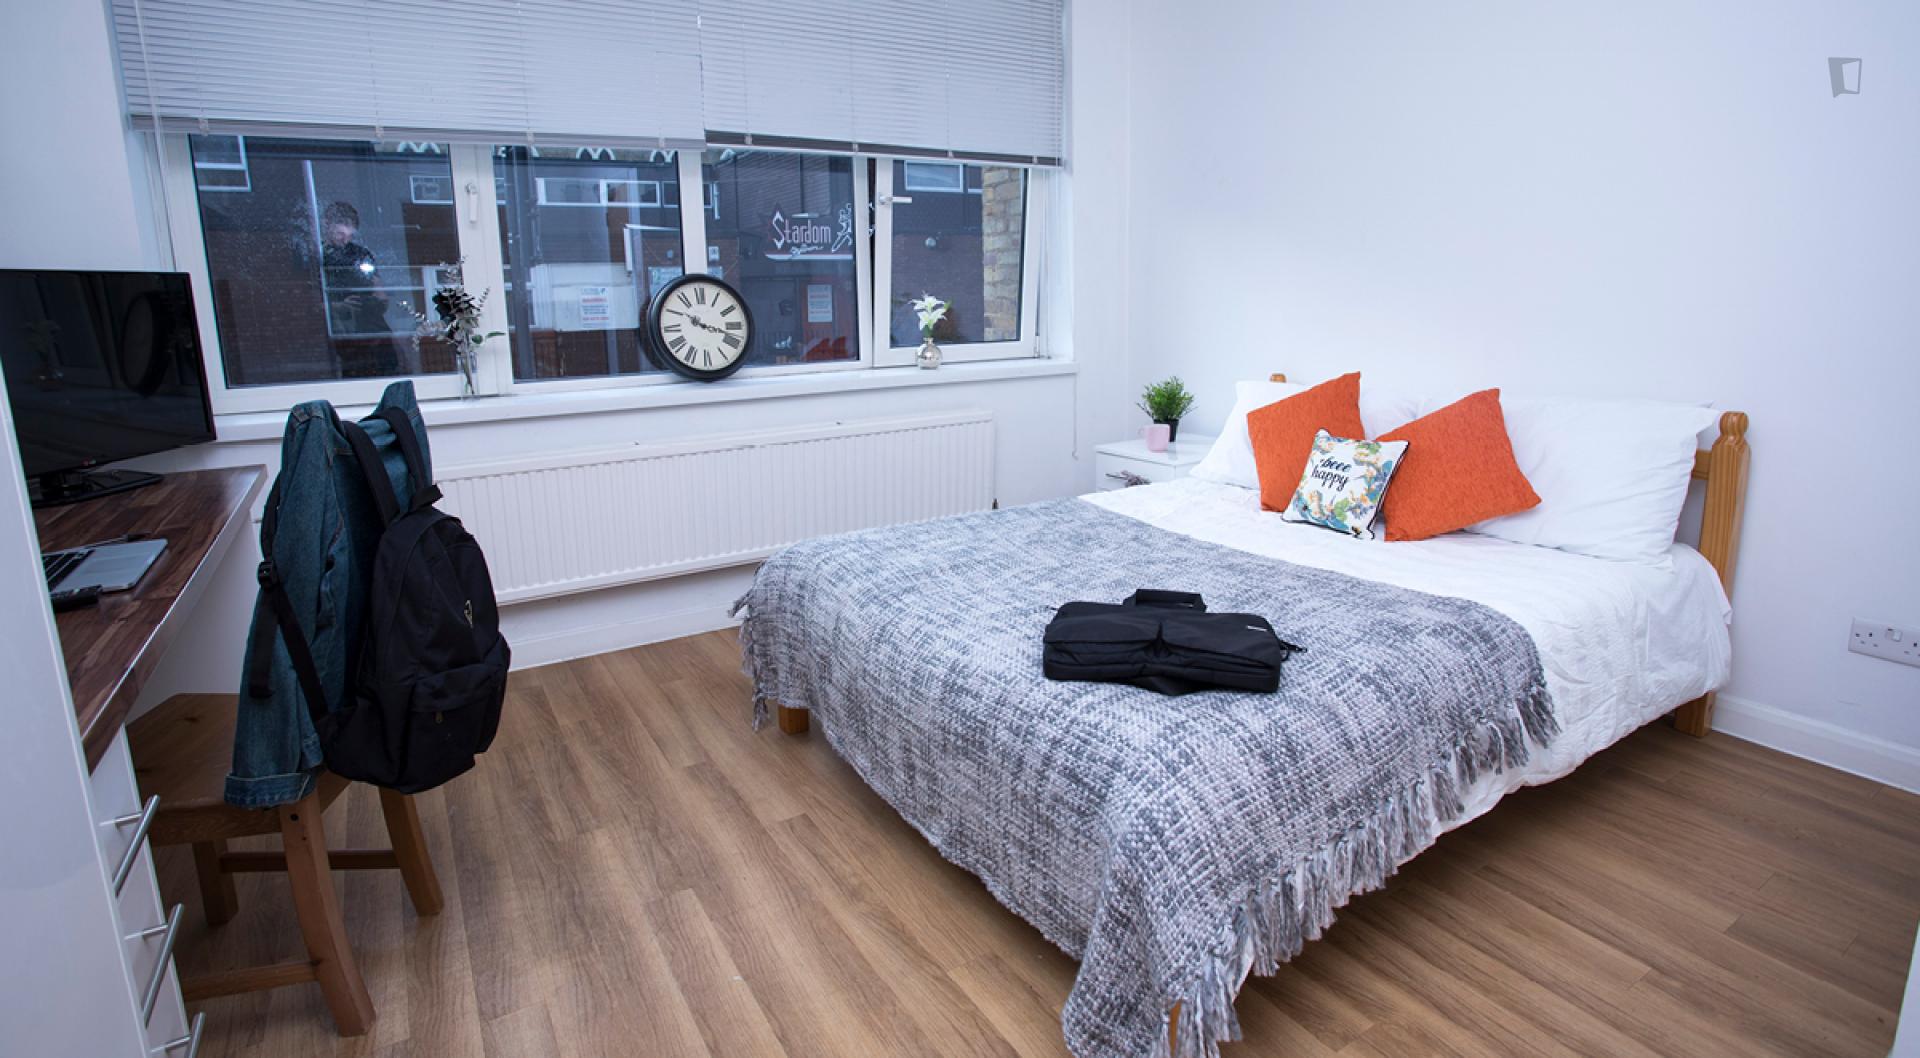 Kensal 2 - Studio for expats in London